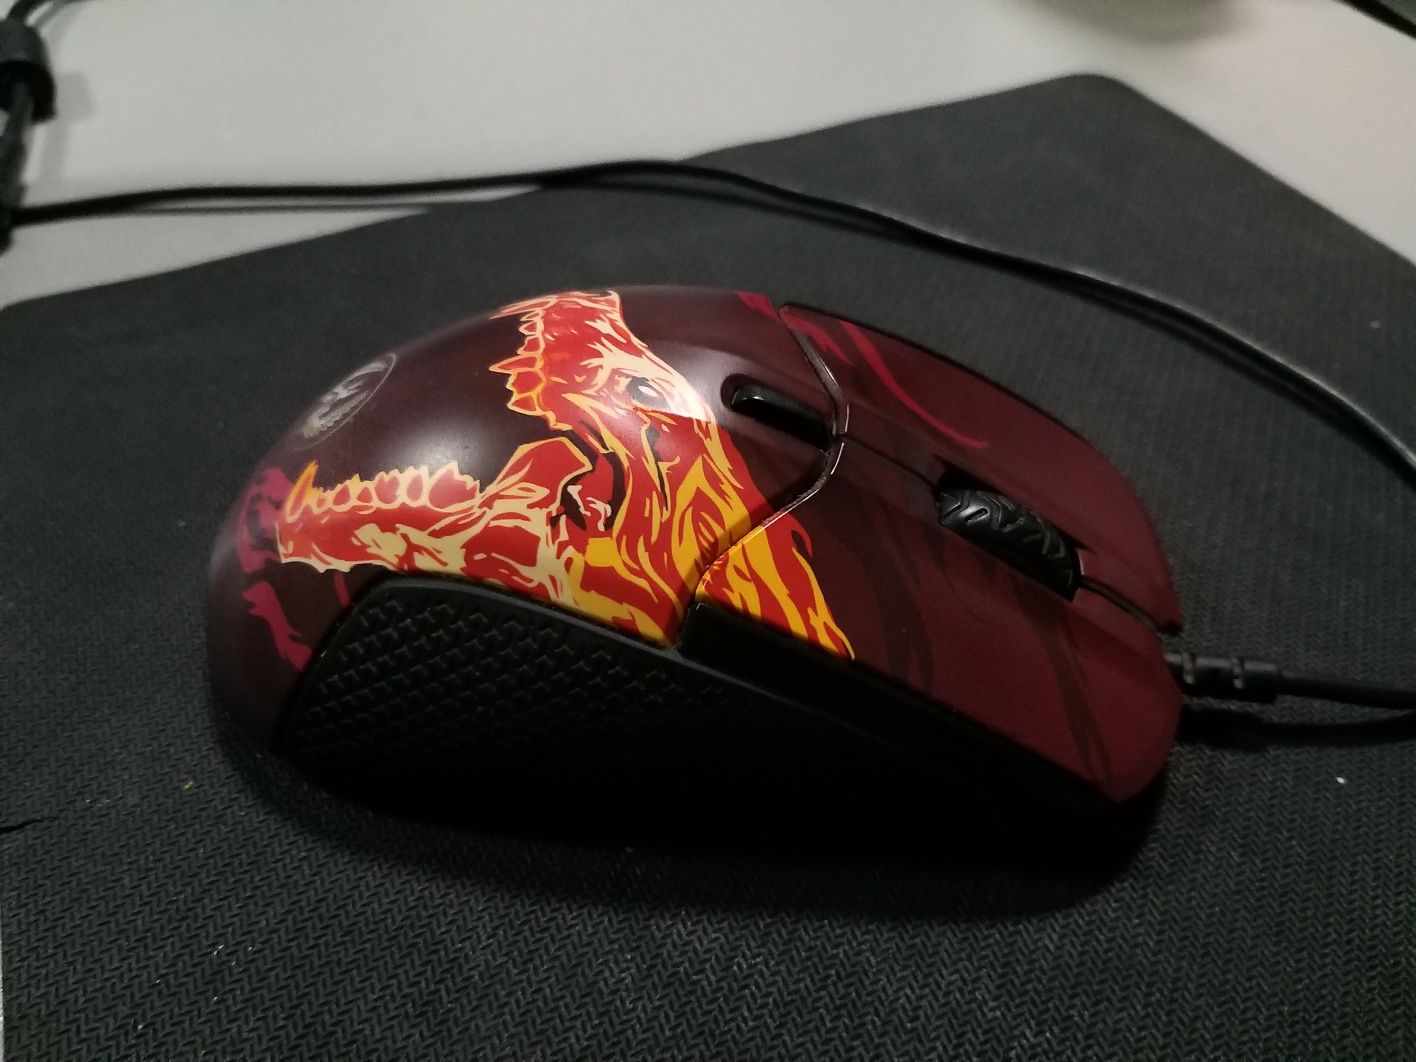 Steelseries rival 310 howl edition